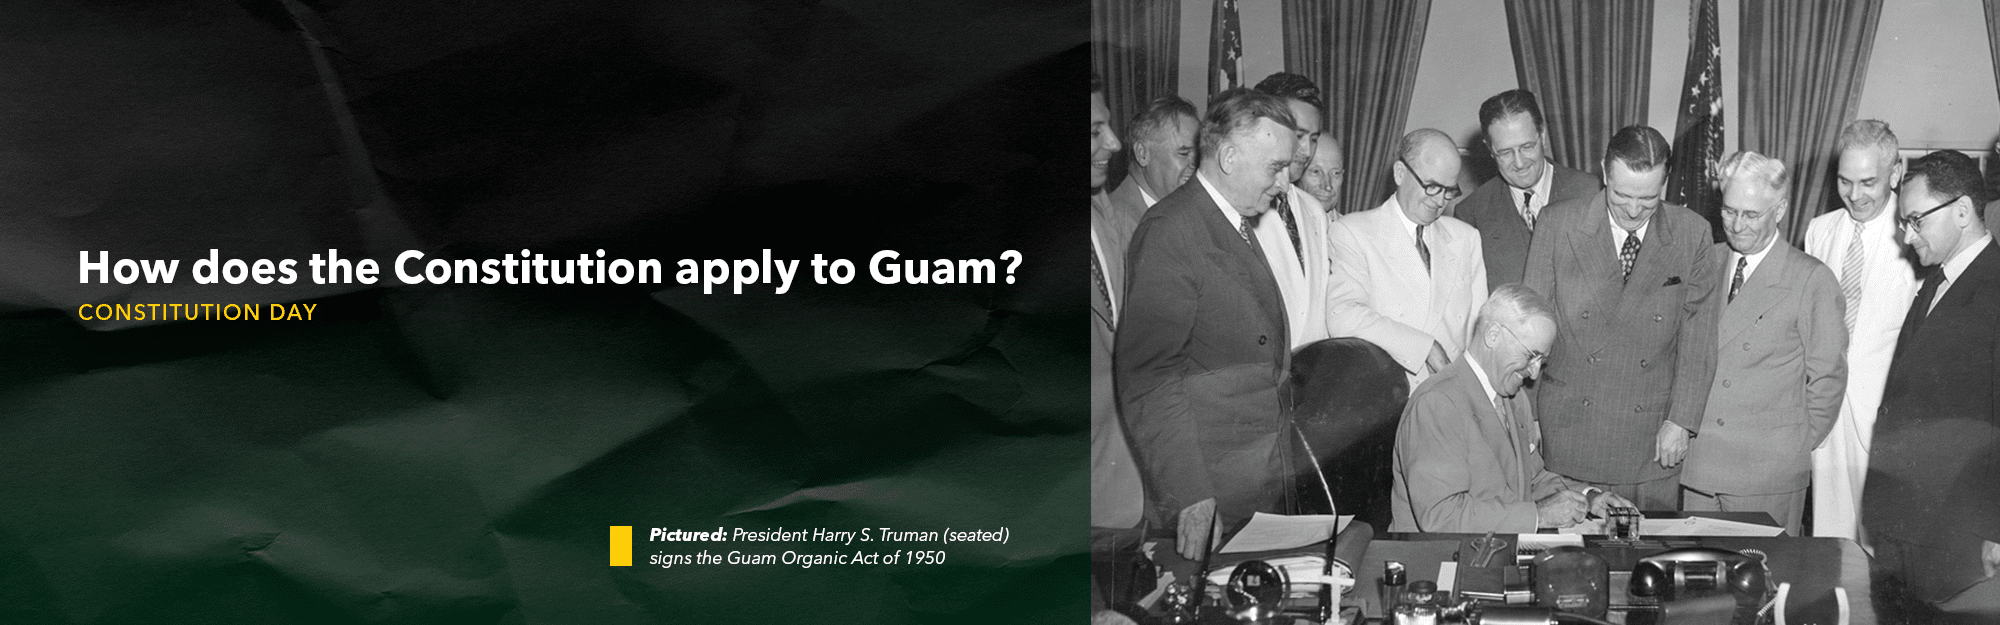 Graphic that says "How does the Constitution apply to Guam?"